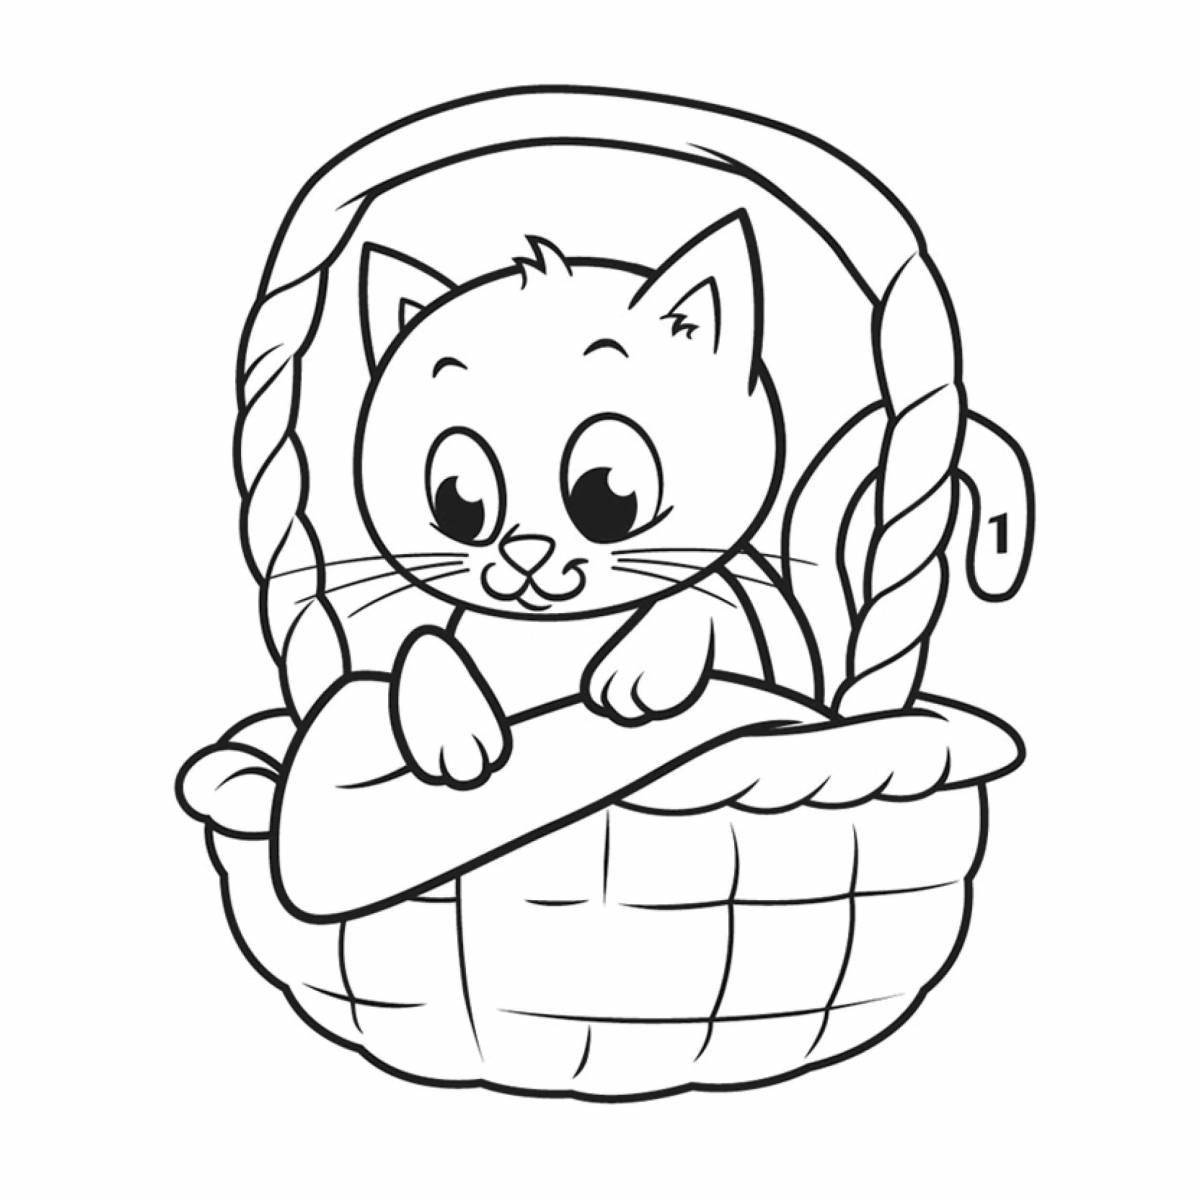 Fun cat coloring by numbers